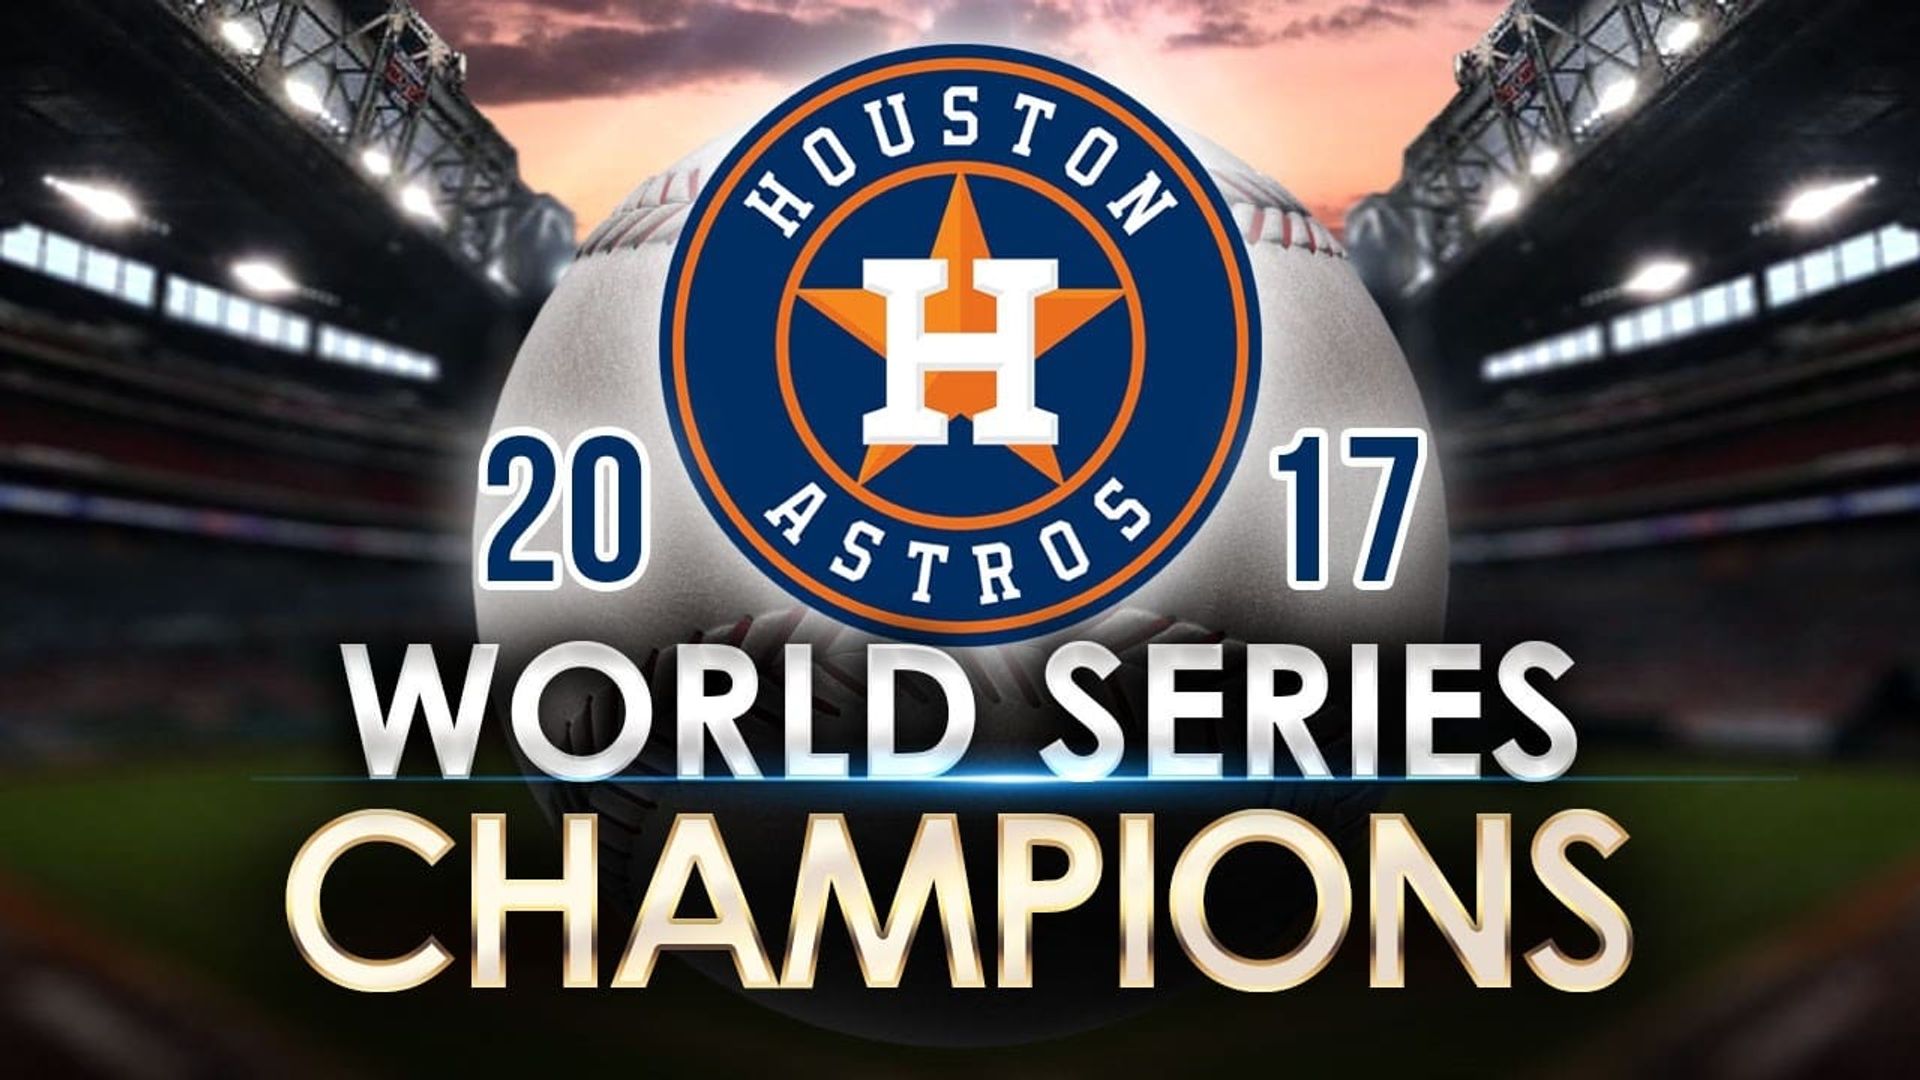 The 2017 World Series background